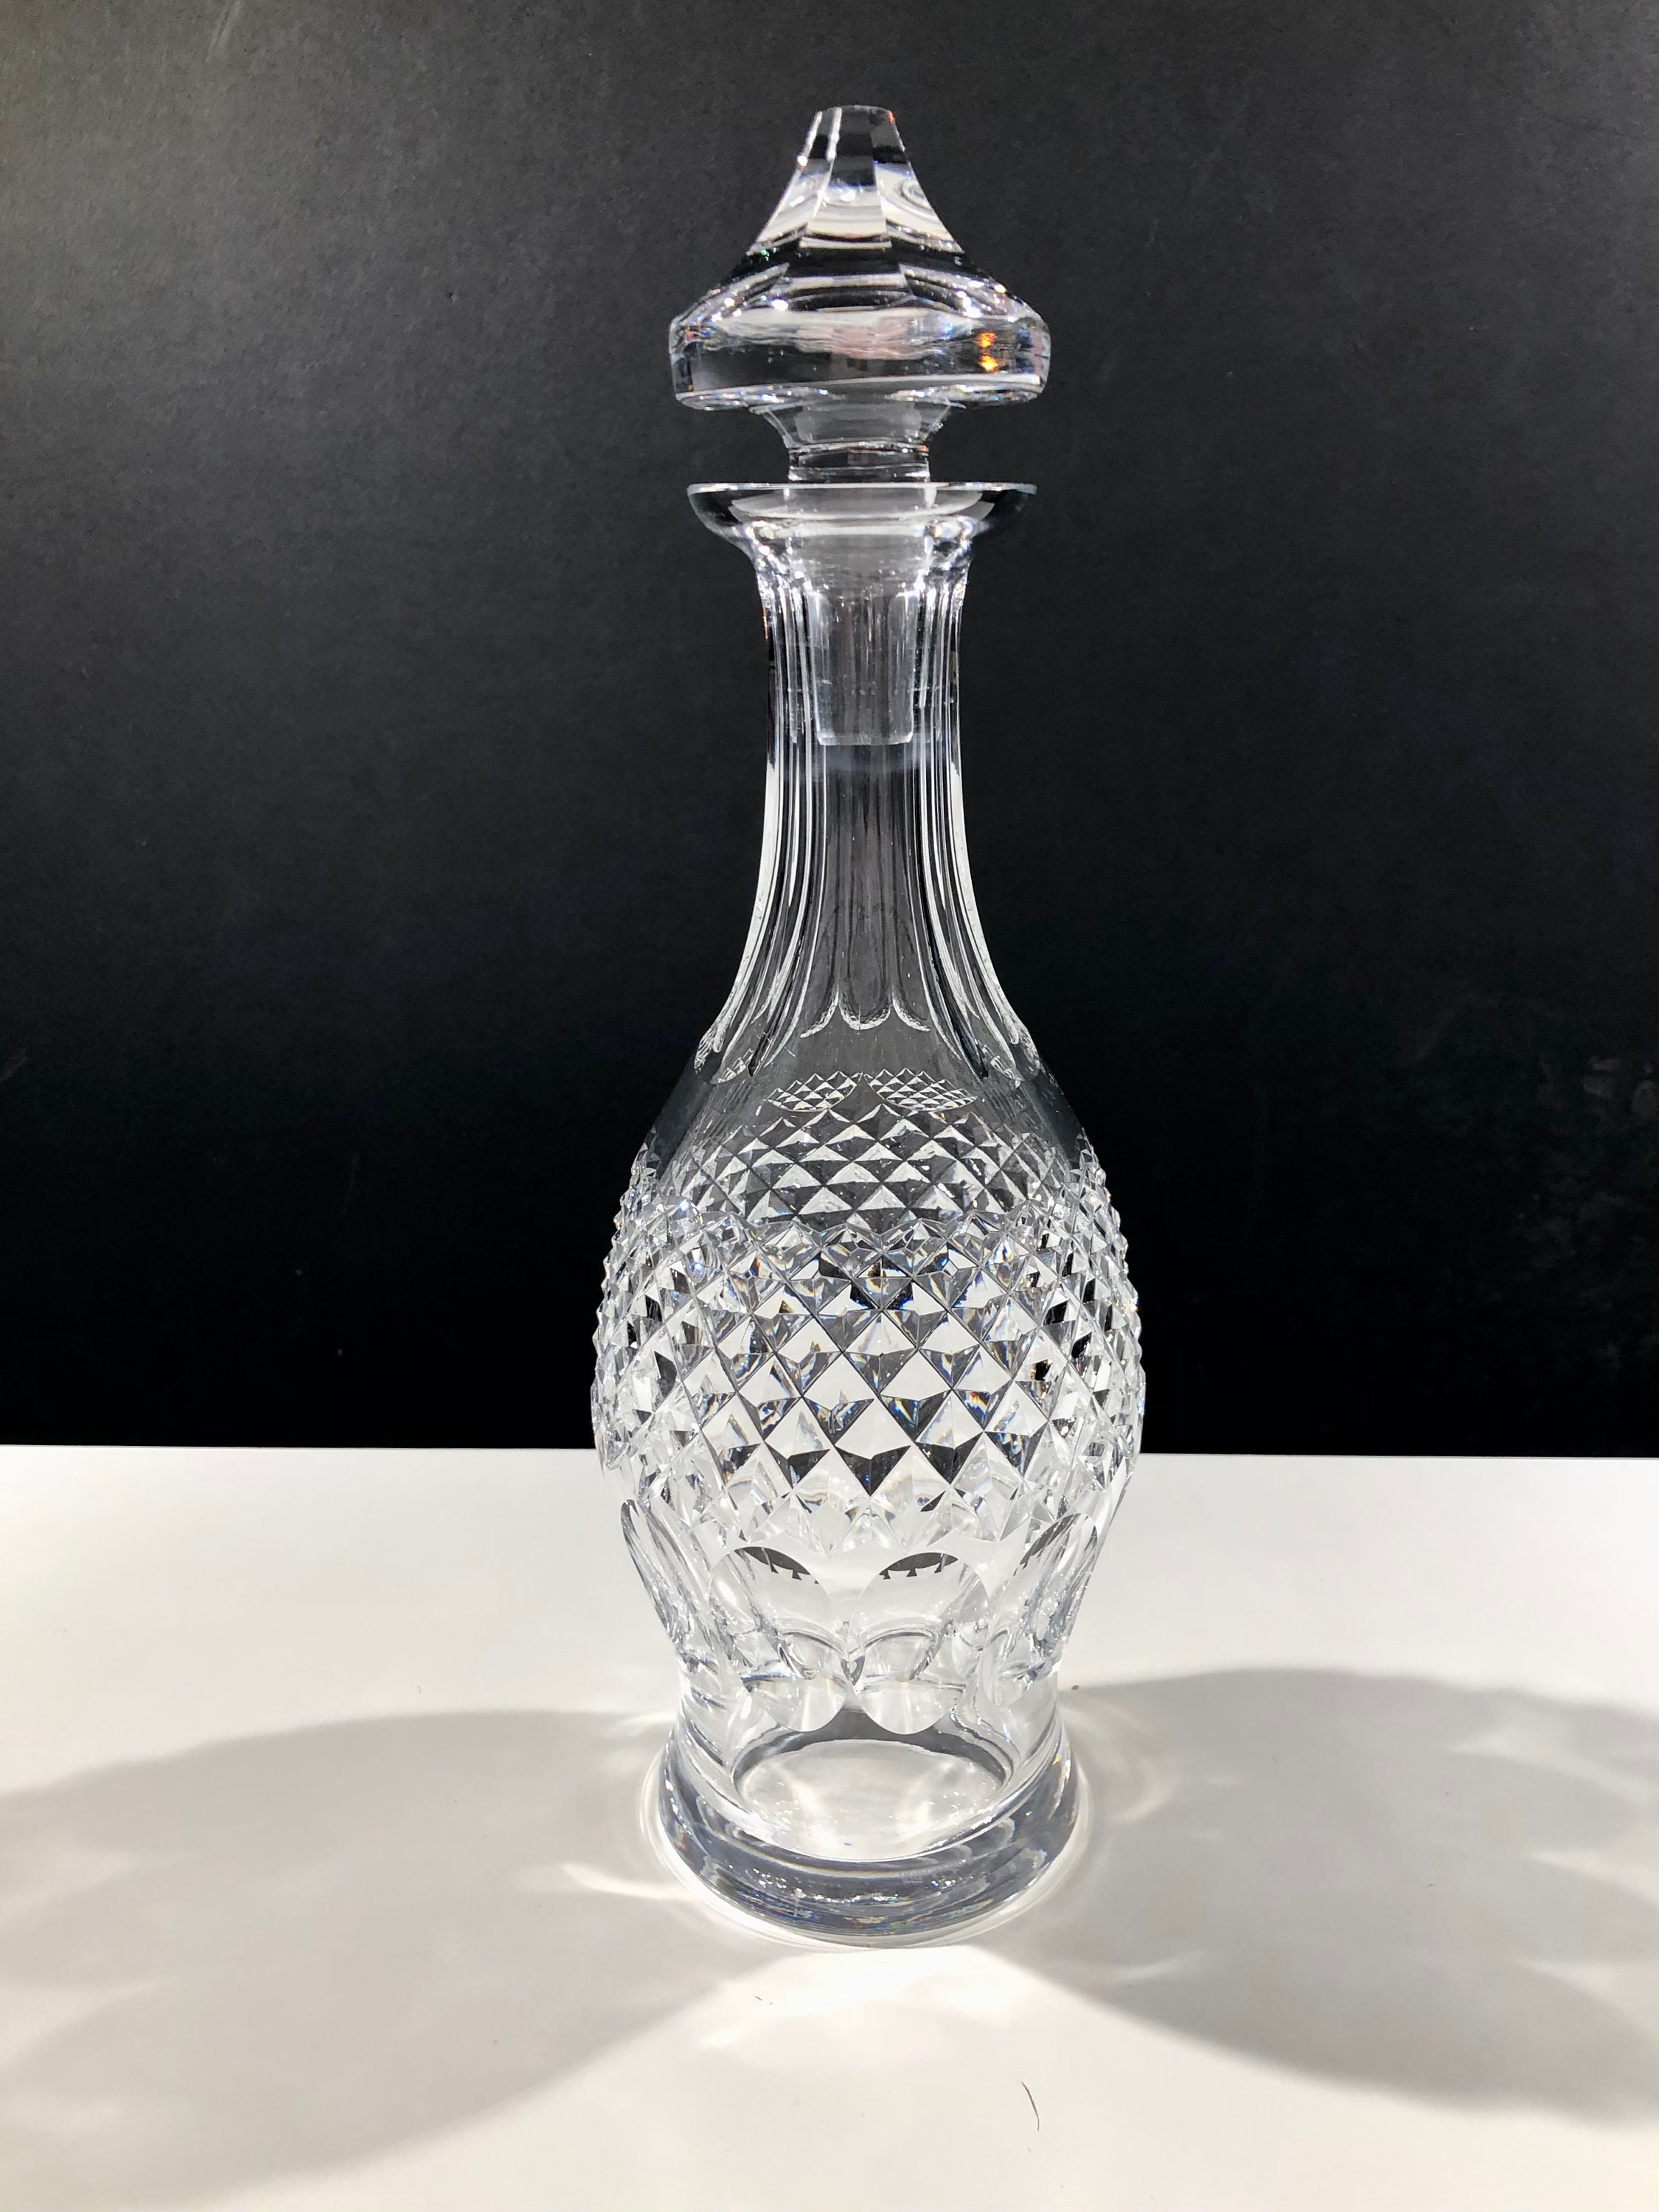 Waterford Crystal Colleen Decanter / Vintage Waterford Brandy Decanter /  Colleen Brandy Decanter / Waterford Crystal Ireland Cut Glass 12